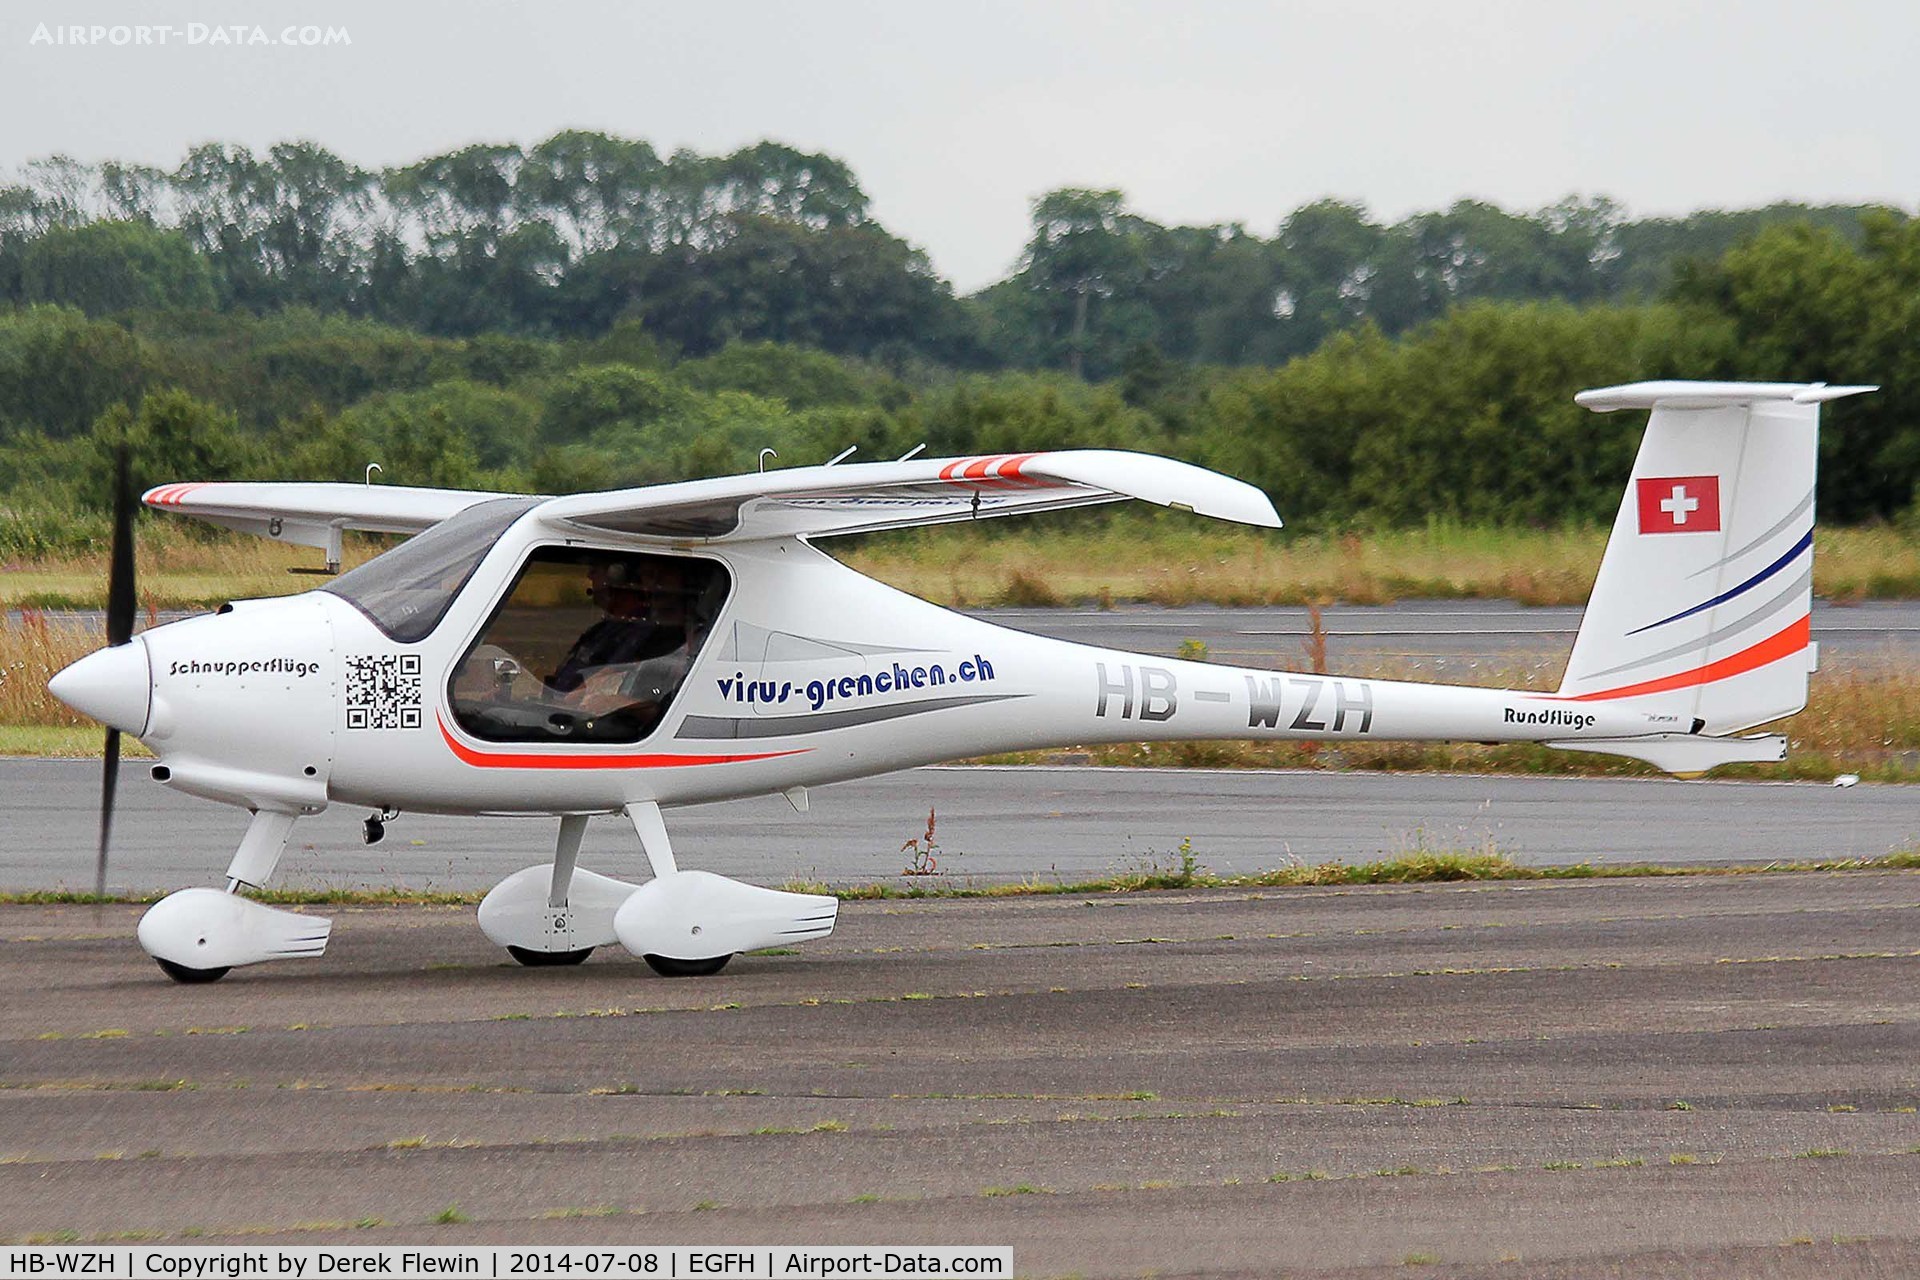 HB-WZH, 2012 Pipistrel Virus SW C/N 428 SWN 100 ELA, Seen taxxing, prior to taking off from runway 04 at EGFH for West Wales Airport, Aberporth.